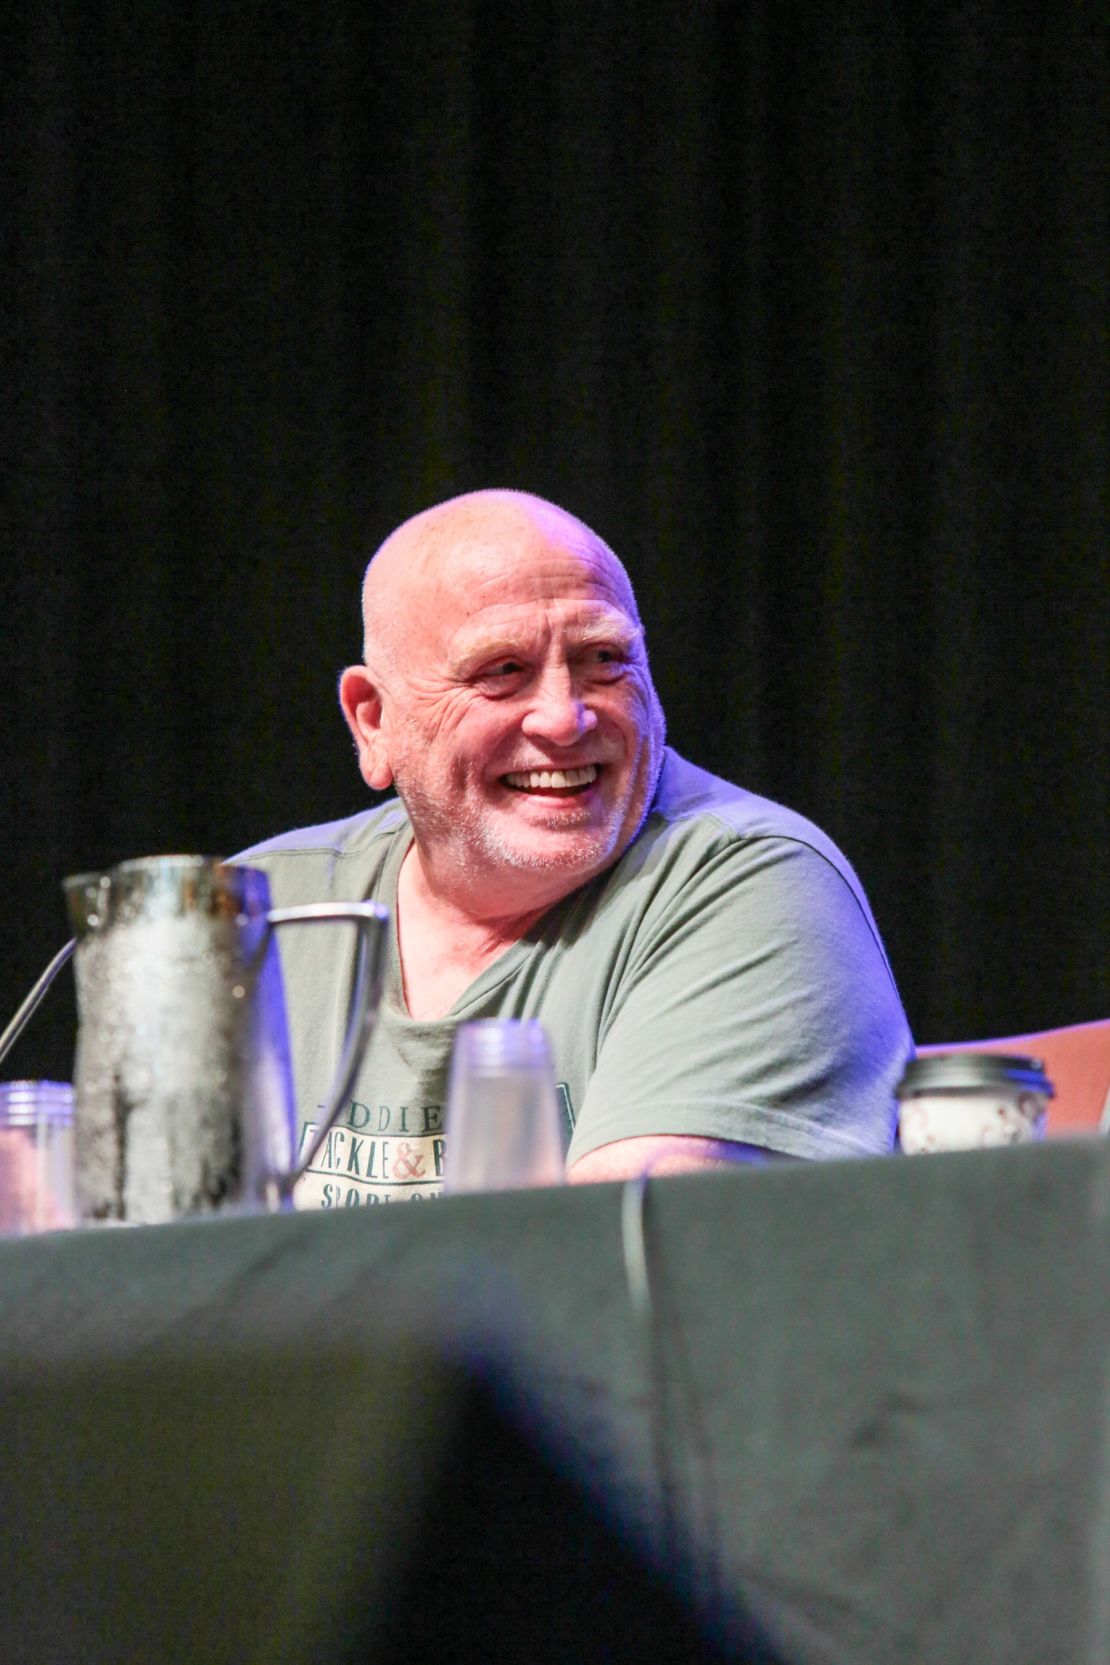 James Cosmo, at DragonCon 2013 in Atlanta, played Night's Watch Commander Jeor Mormont on "Game of Thrones."